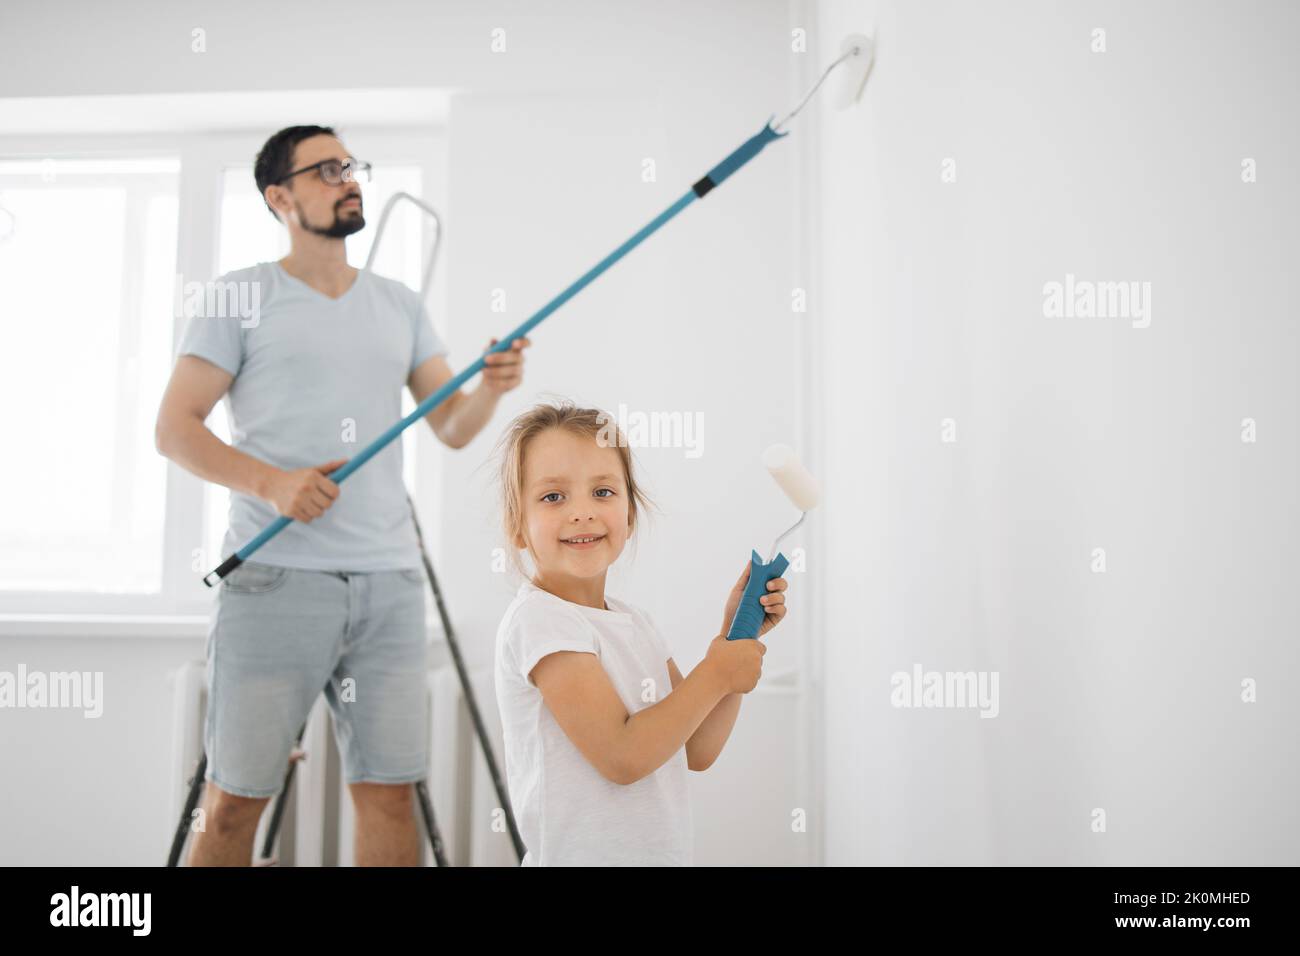 Smiling 4-year-old girl holds a paint roller in her hands. The child helps her father, who is standing behind her, near the wall, in the repair. Stock Photo